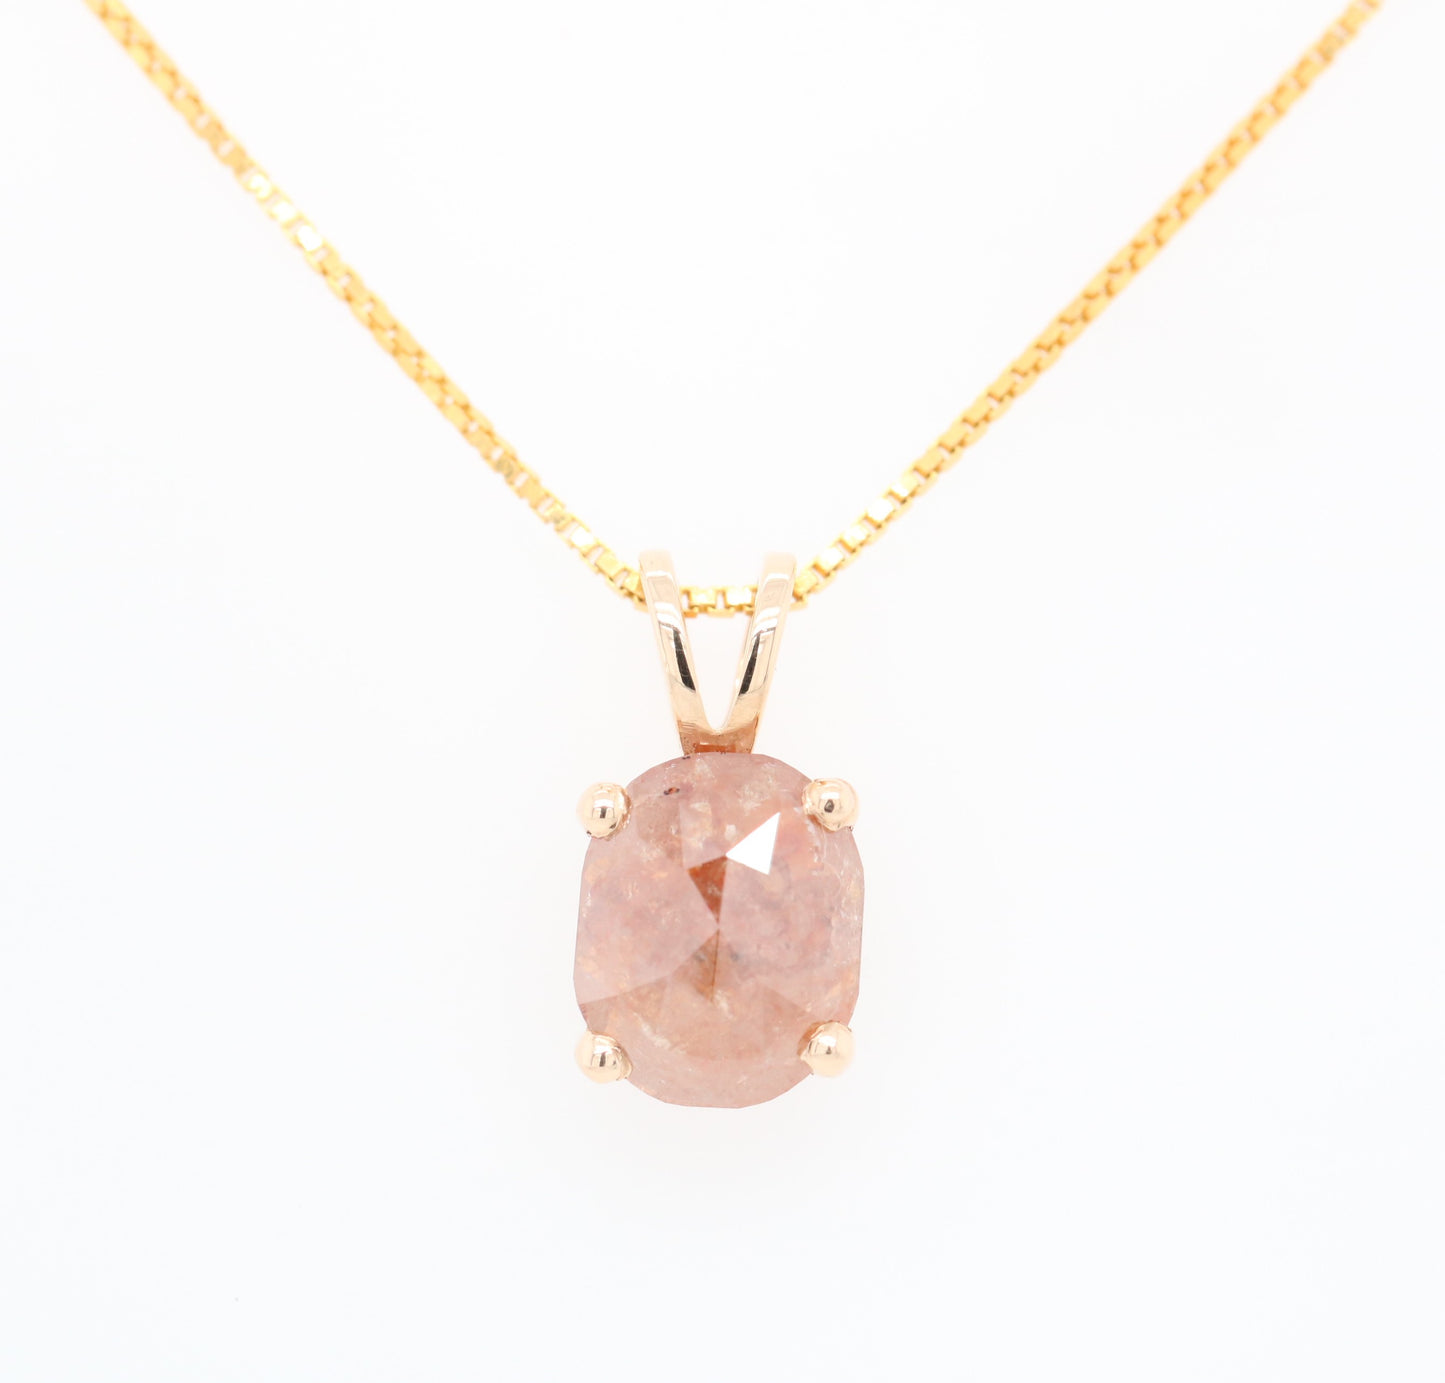 Oval Shape Peach Diamond Pendant with 10K Yellow Gold Pendant With Gold Chain Gift For Her